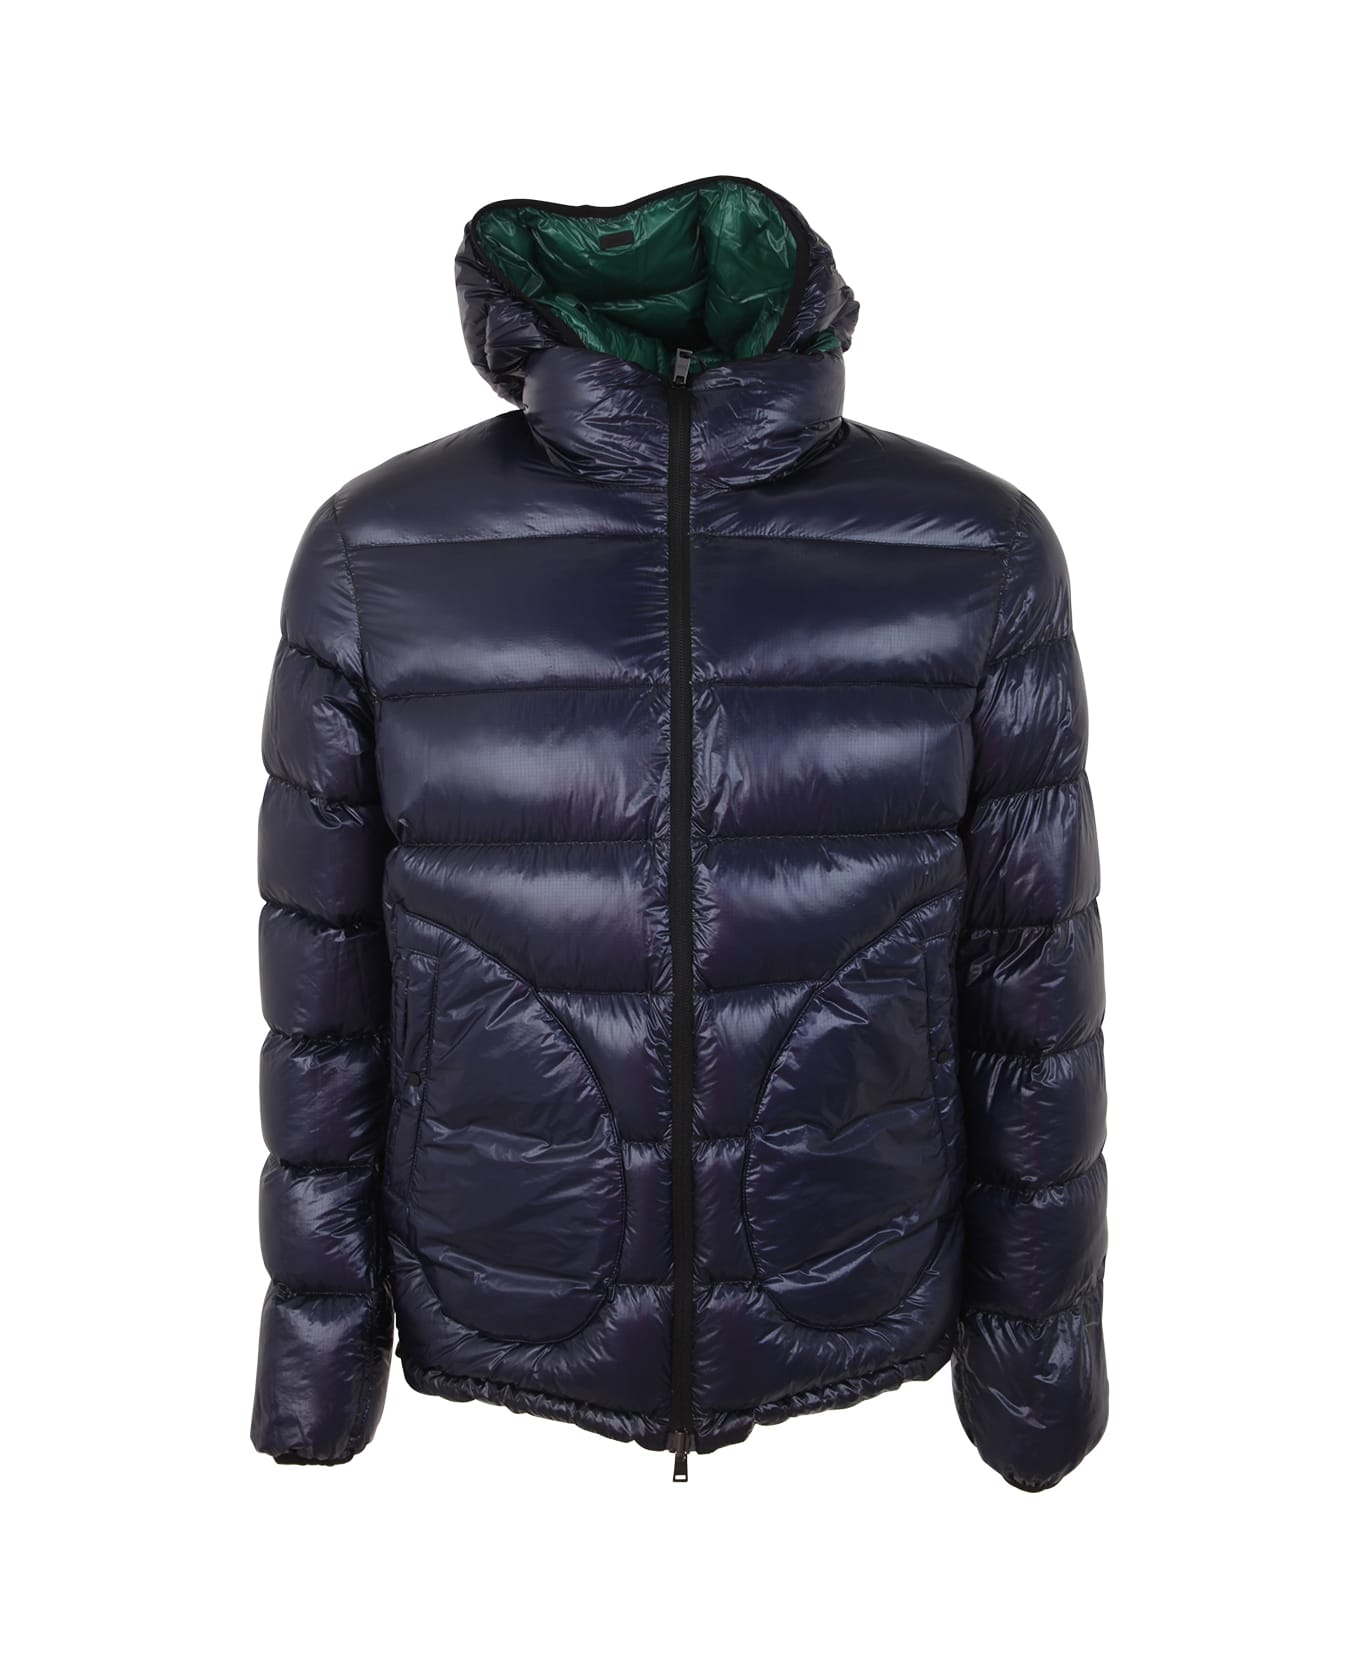 Herno Reversible Green Blue Down Jacket - College Green